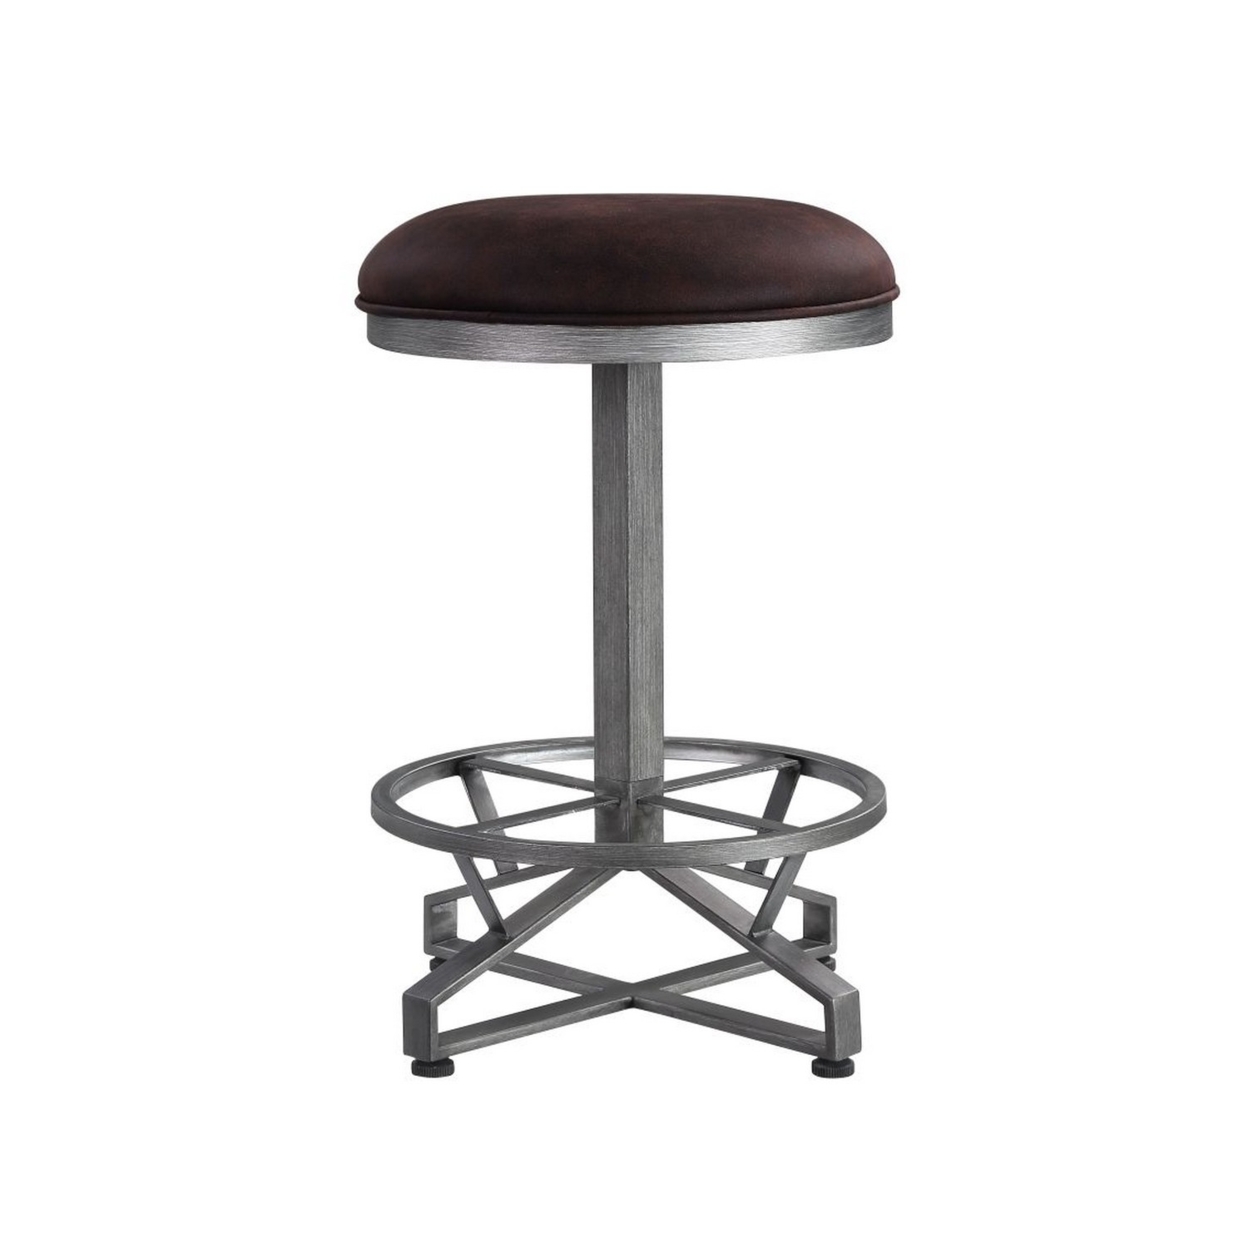 Counter Height Stool With Padded Seat And Intricate Base, Brown- Saltoro Sherpi